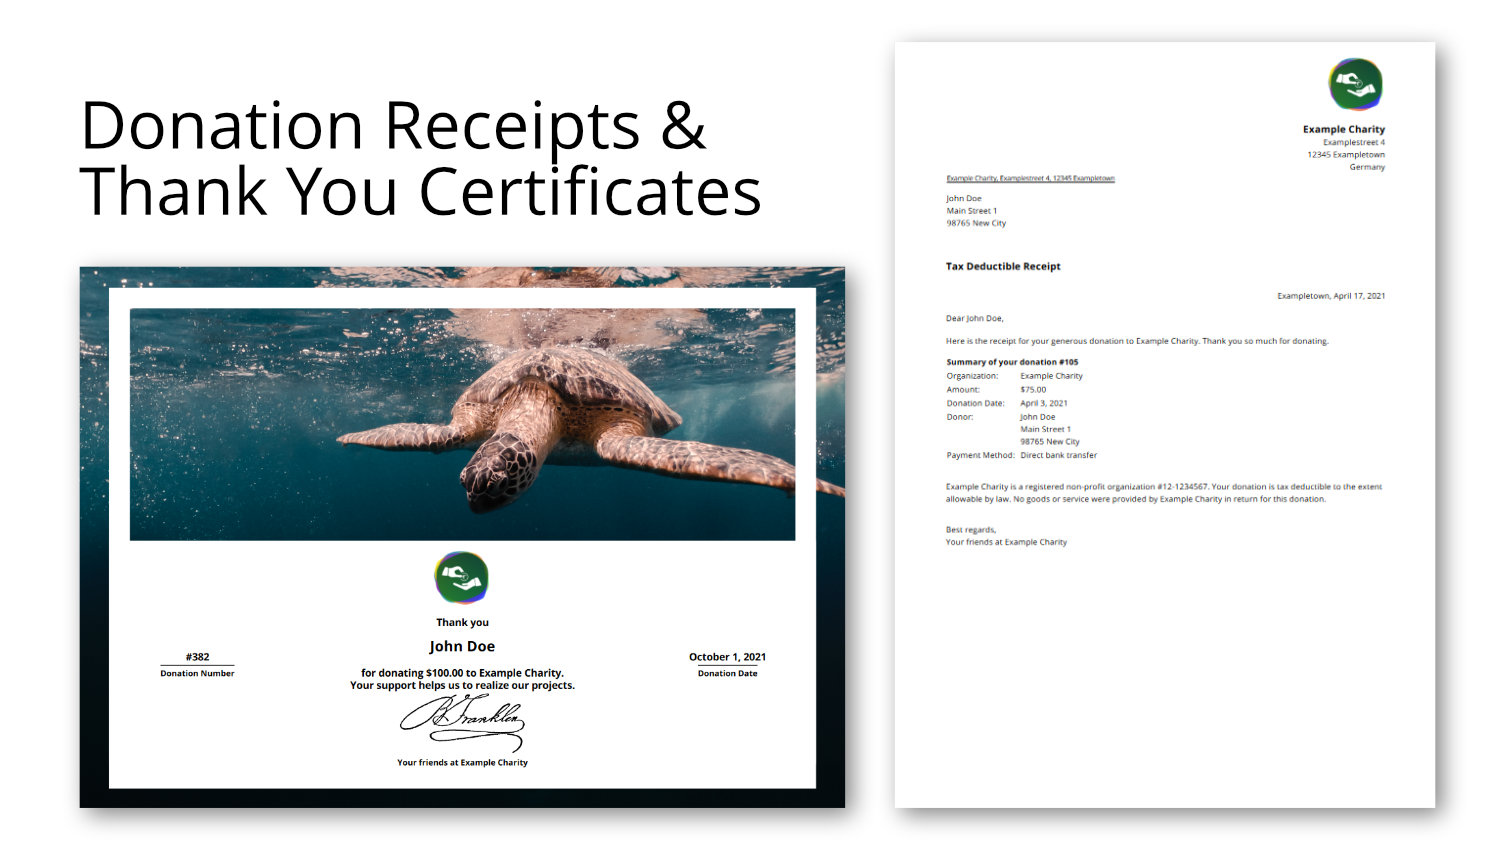 Automatically generate tax-deductible donation receipts and thank your donors with a personalized thank-you certificate.